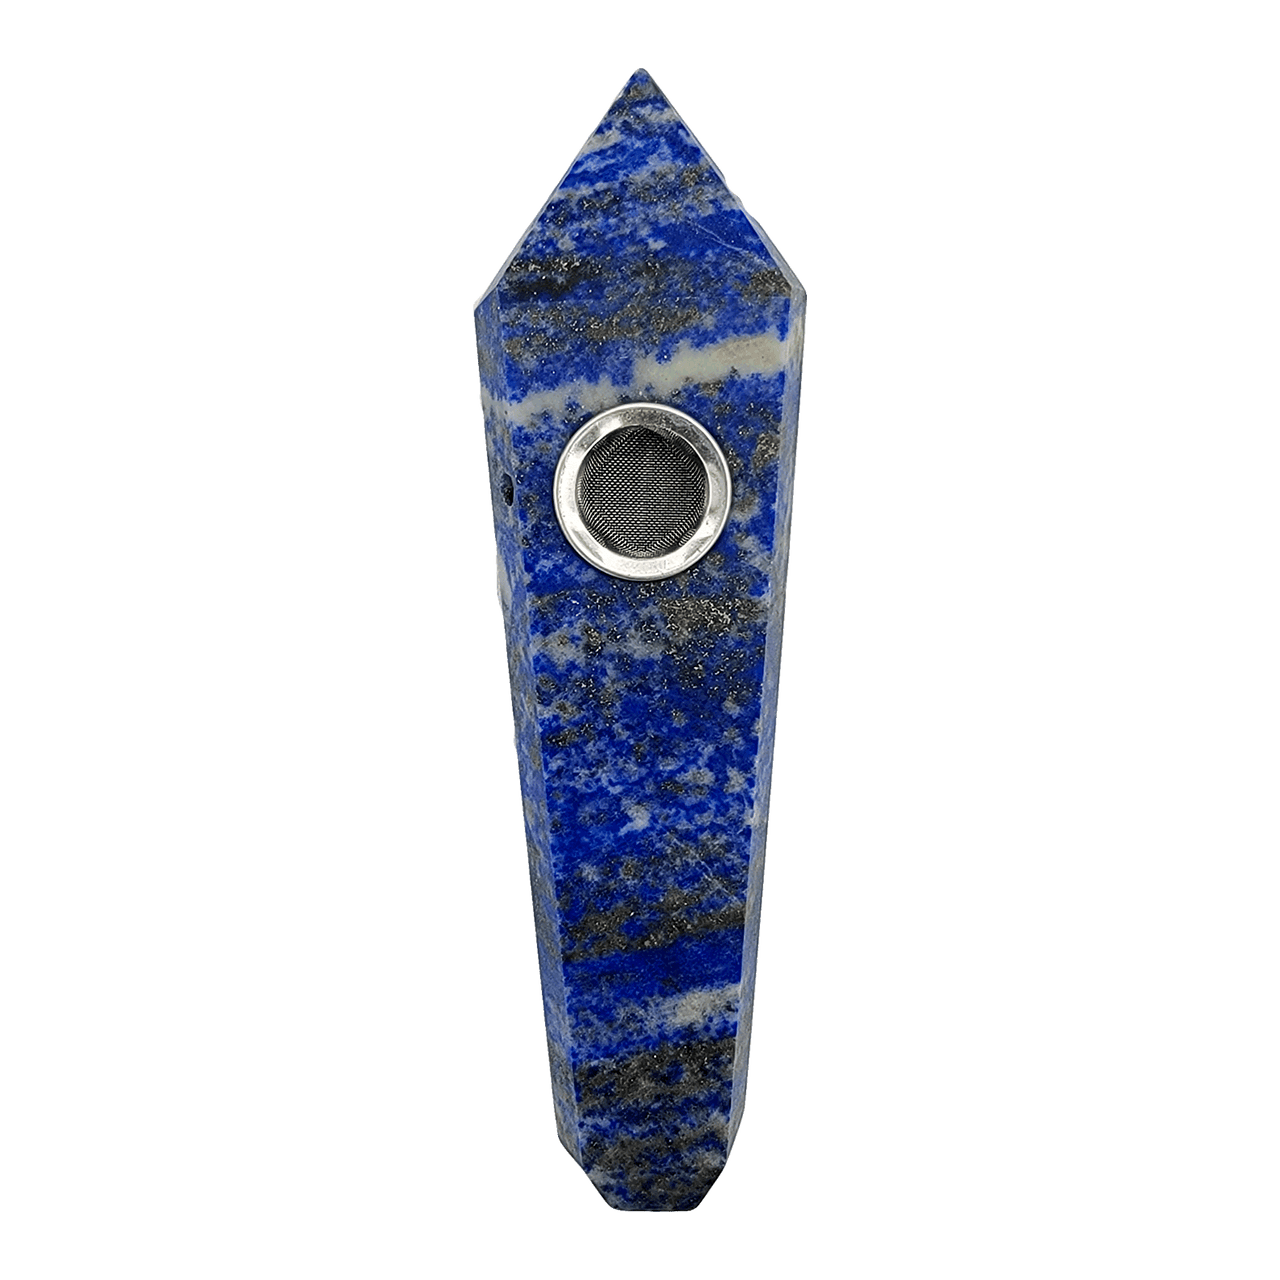 Blue Power Lapis Lazuli Crystal Pipe. We sold thousands of crystal pipes and natural stones in the past year. Avoid false providers, with us you are guraanteed to receive a real gemstone or crystal for the best price. 